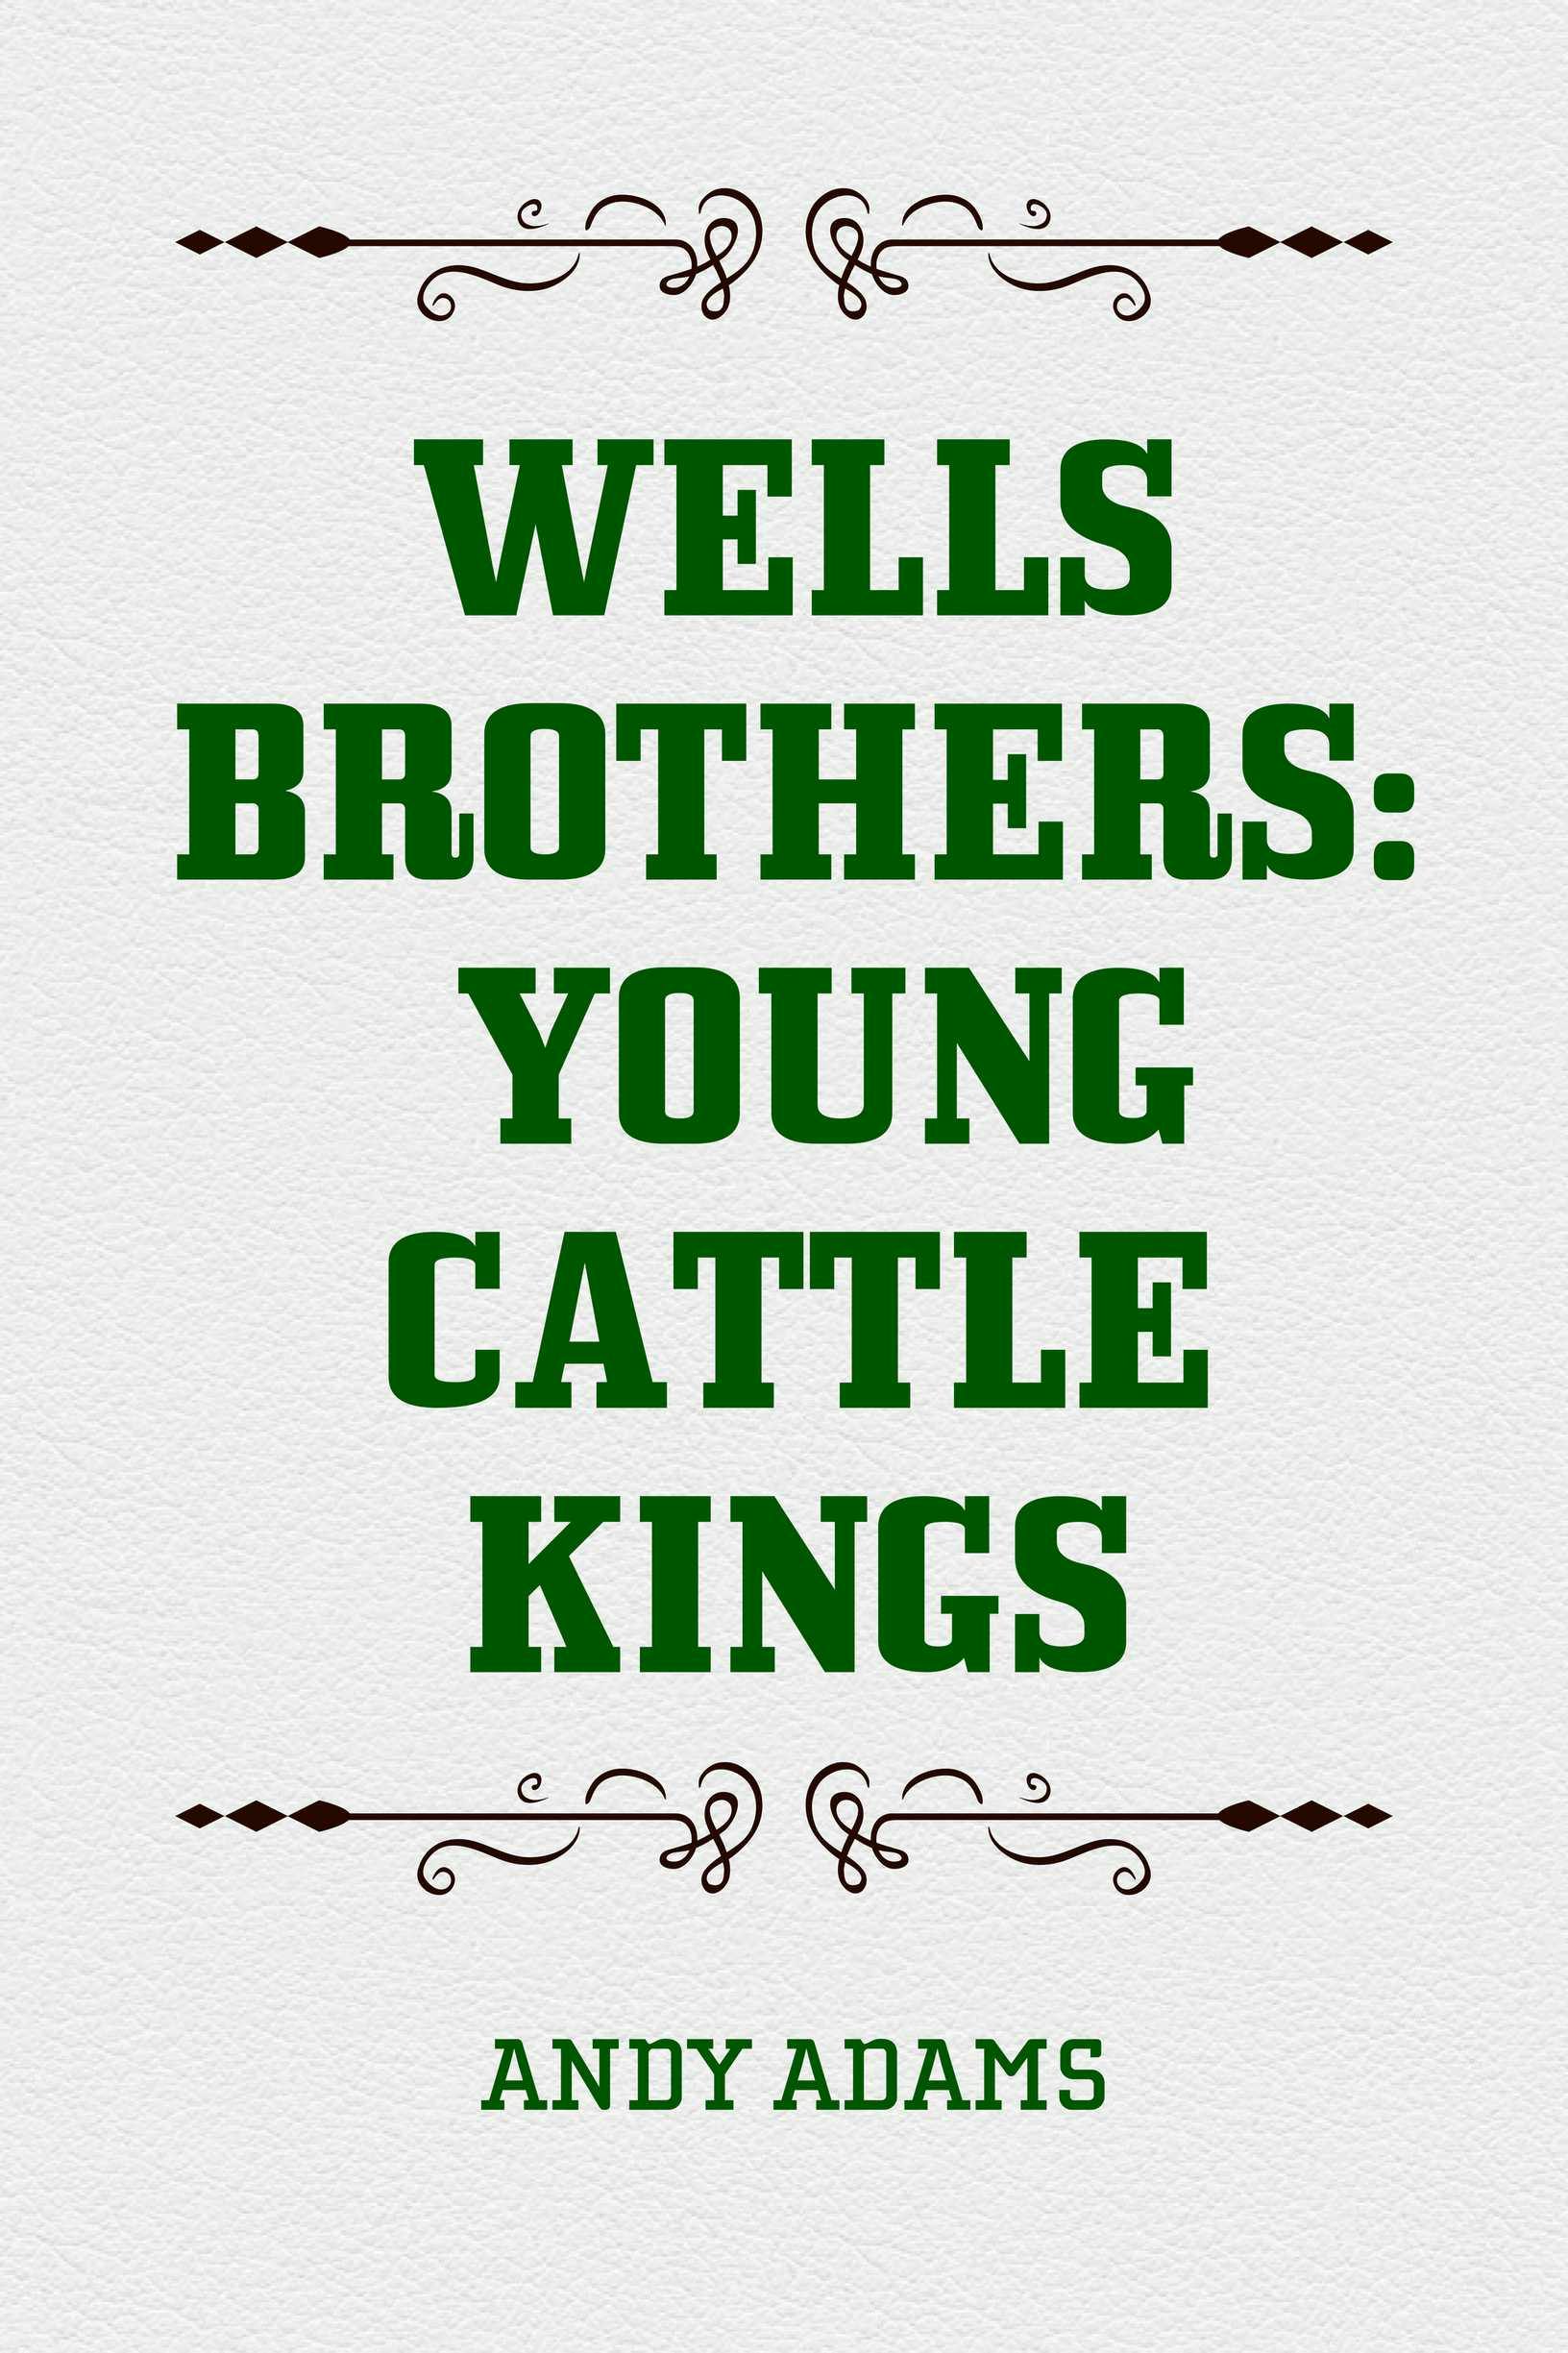 Wells Brothers: Young Cattle Kings - Andy Adams